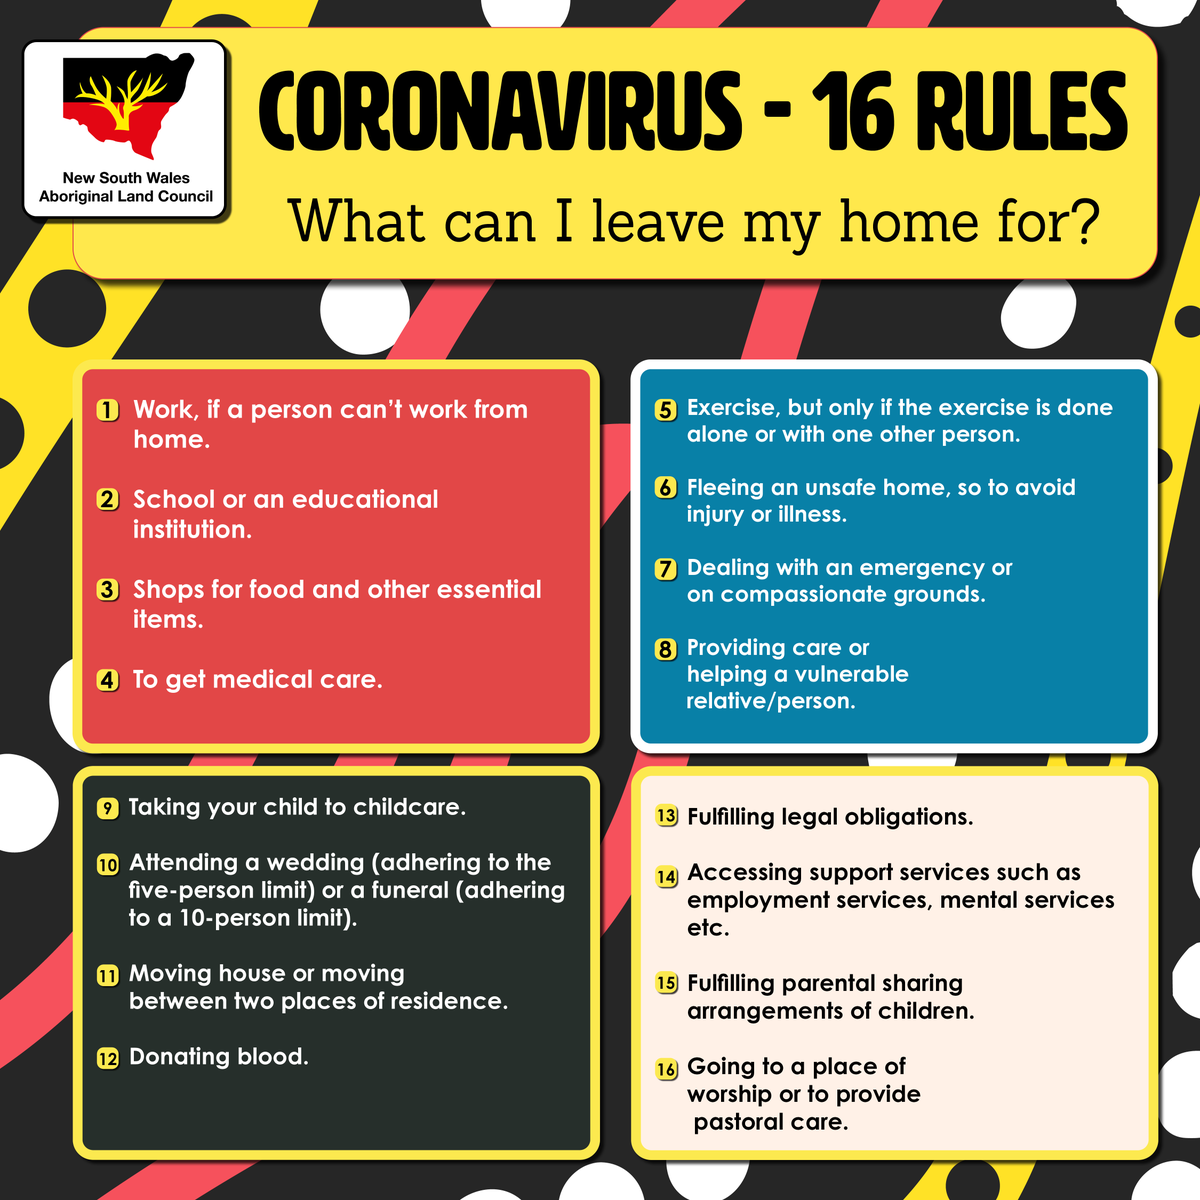 Not too sure of the latest rules? It's important to know what you CAN and what you CAN'T leave your home for during this period of #COVID19 isolation. Check out our list below for a quick go-to guide! #stopthespread #lookafterourmob #nswalc